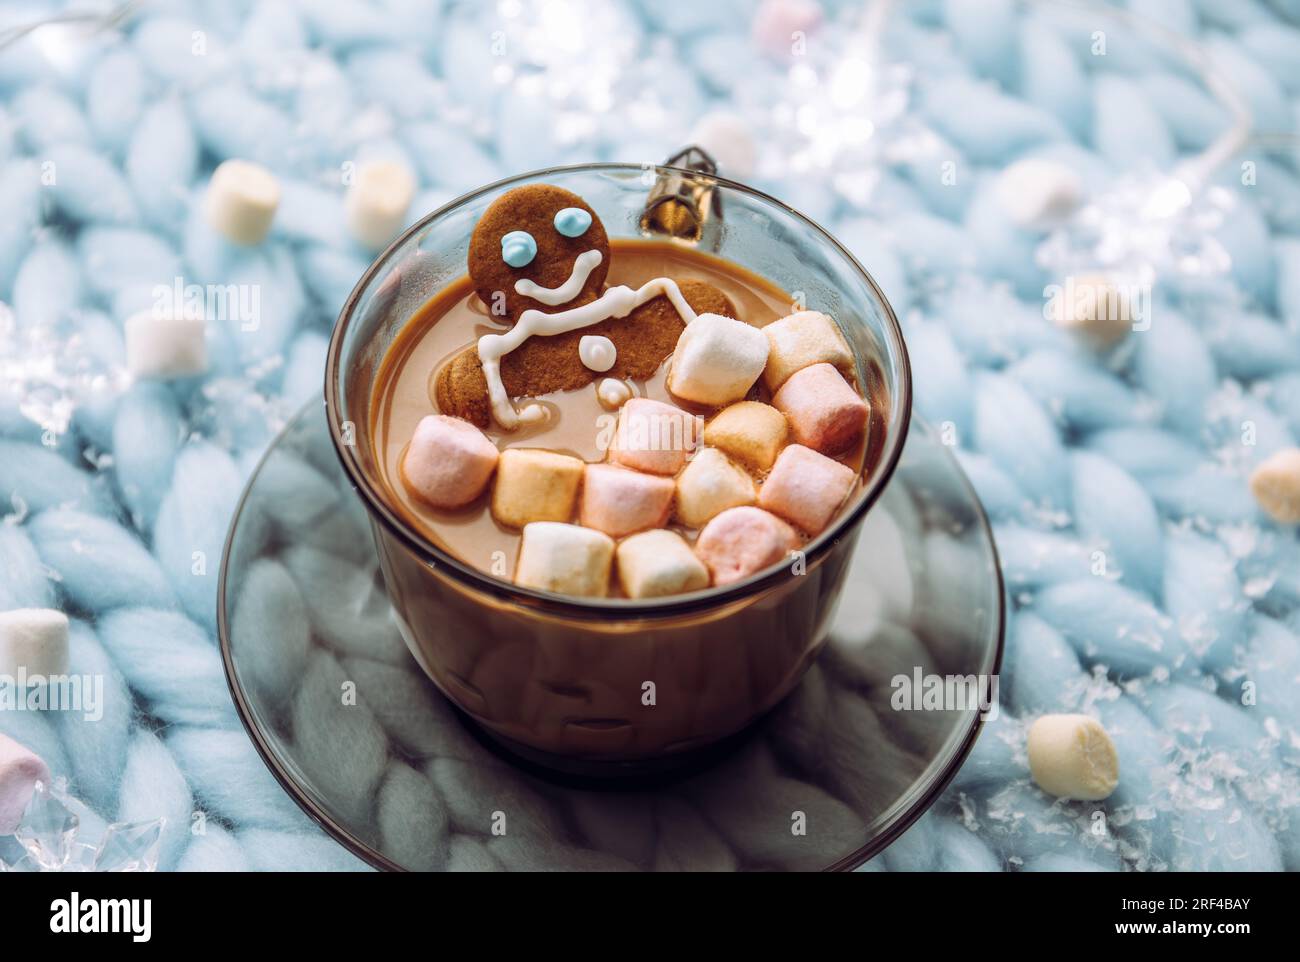 Gingerbread man soaking in a cup of hot chocolate with marshmallows, cozy winter setting in home. Stock Photo